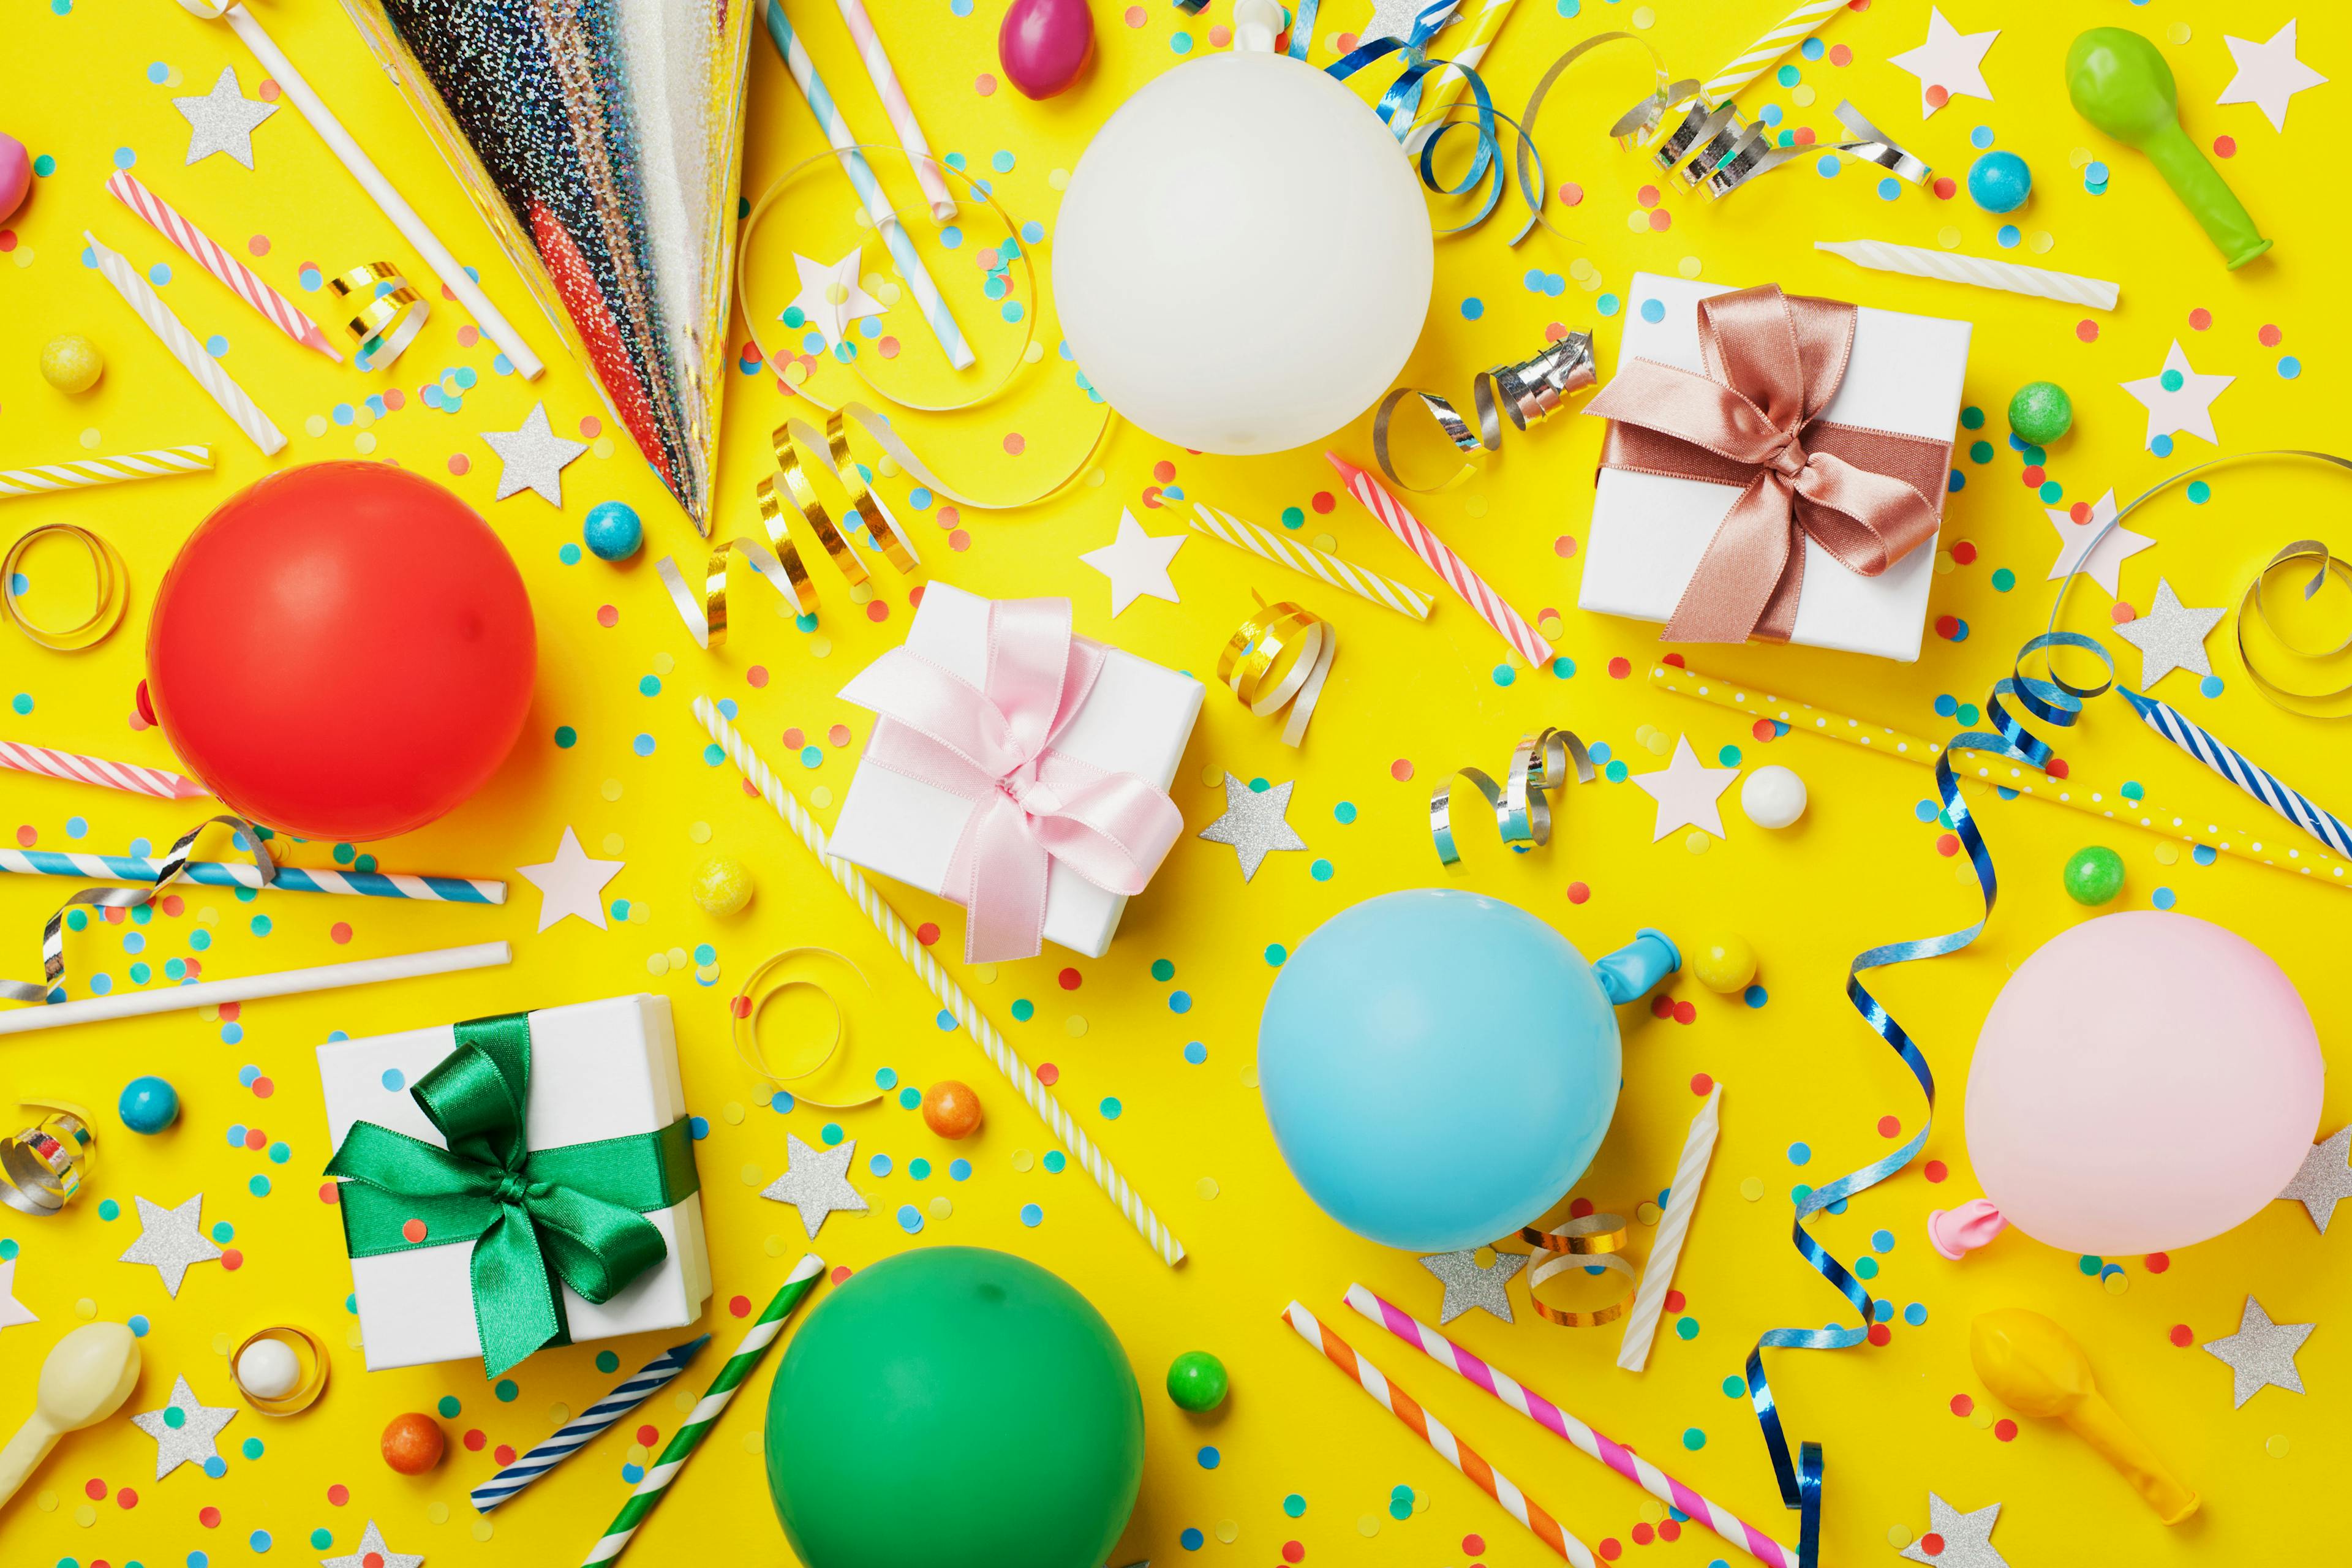 Yellow Background covered in small multi-colored dot confetti. Three small packages wrapped in bows and a party hat